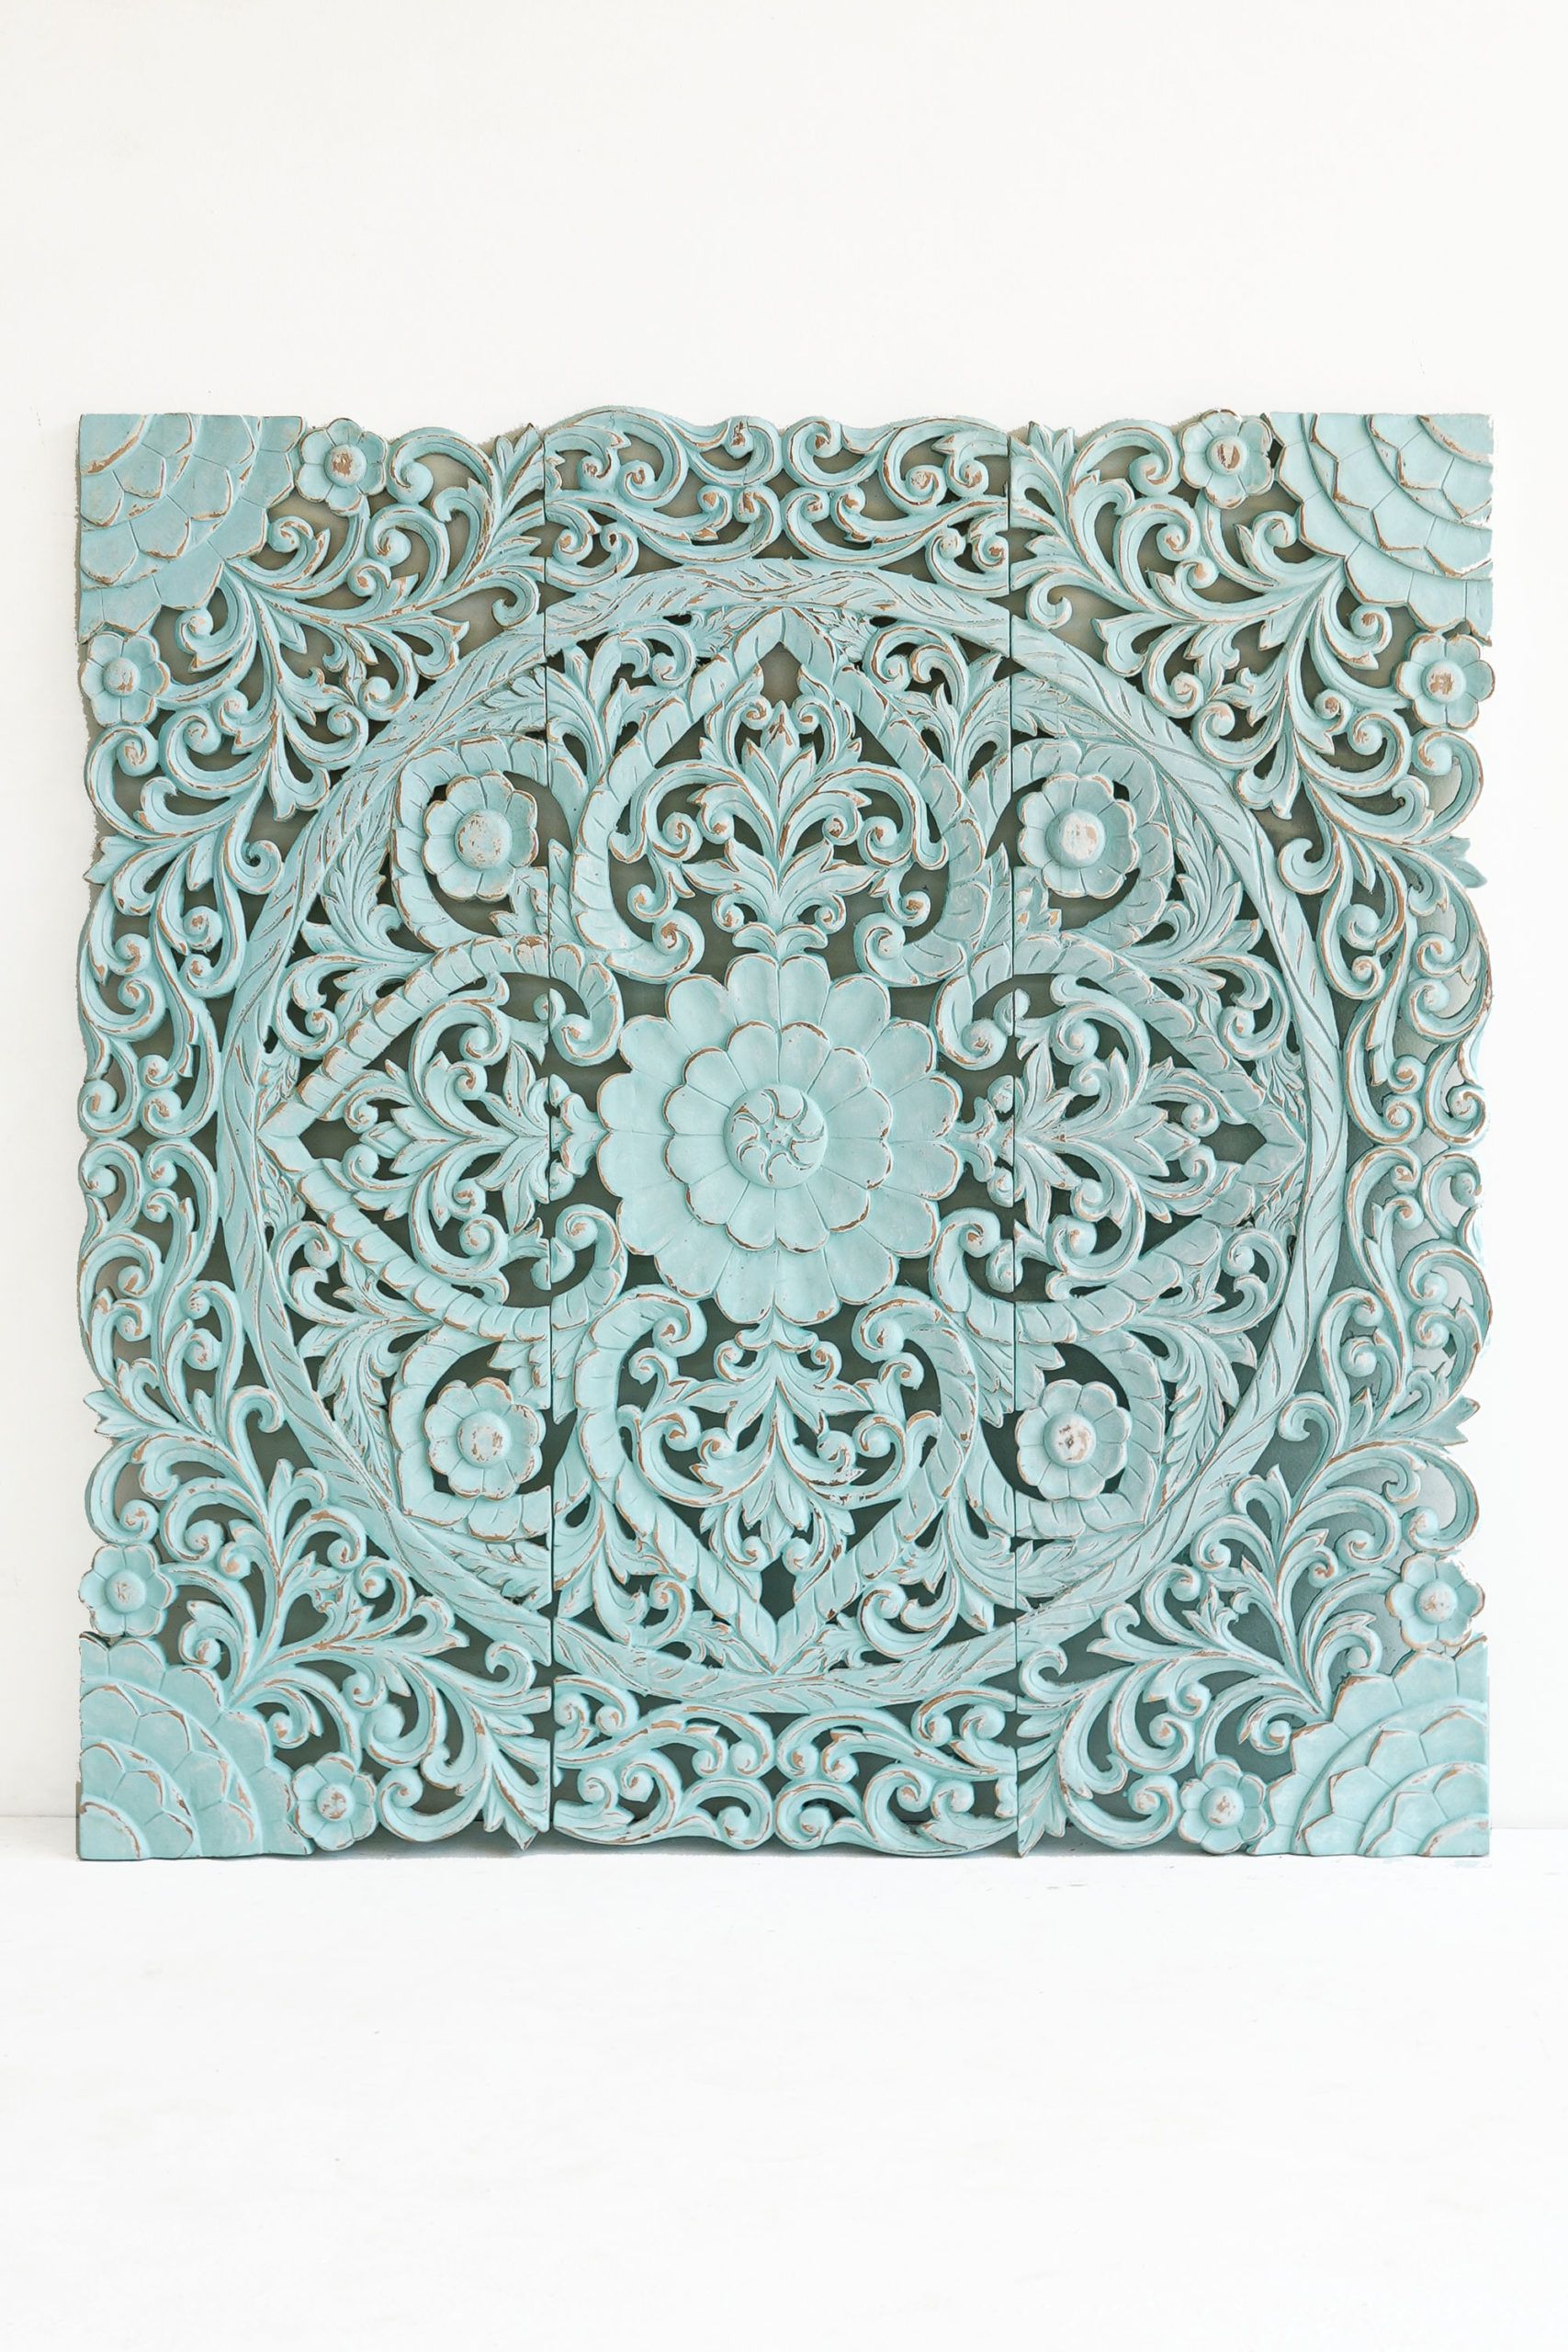 Hand Carved Wall Panel From Bali – Siam Sawadee Intended For Latest Blue Wood Wall Art (View 19 of 20)